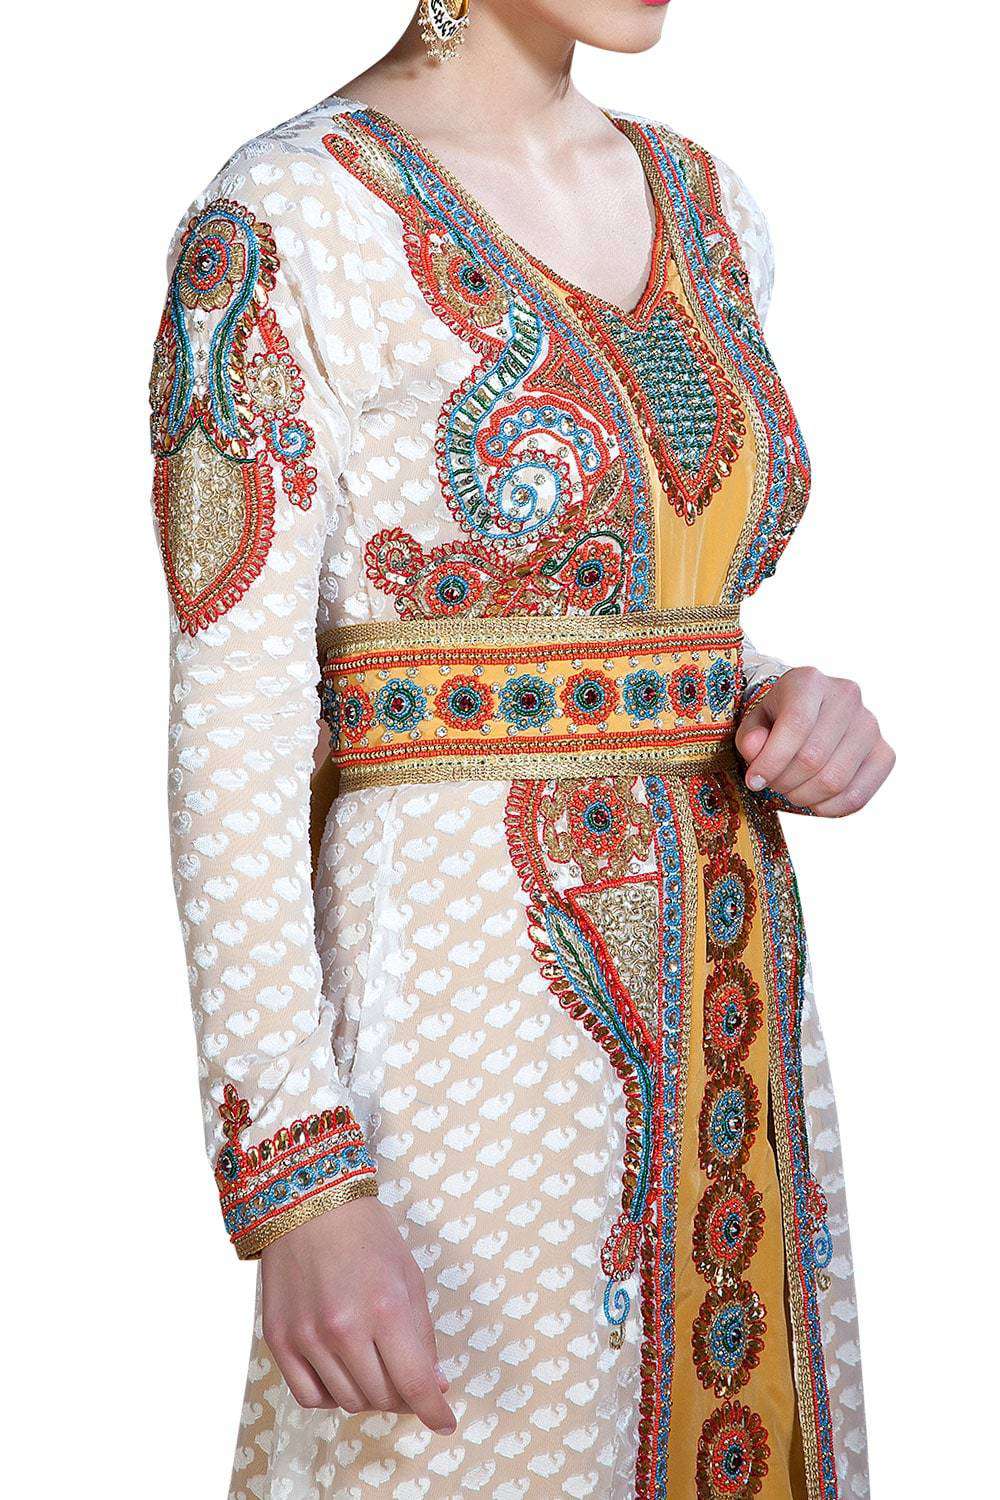 Off White and Golden Color Hand Beaded Moroccan Kaftan